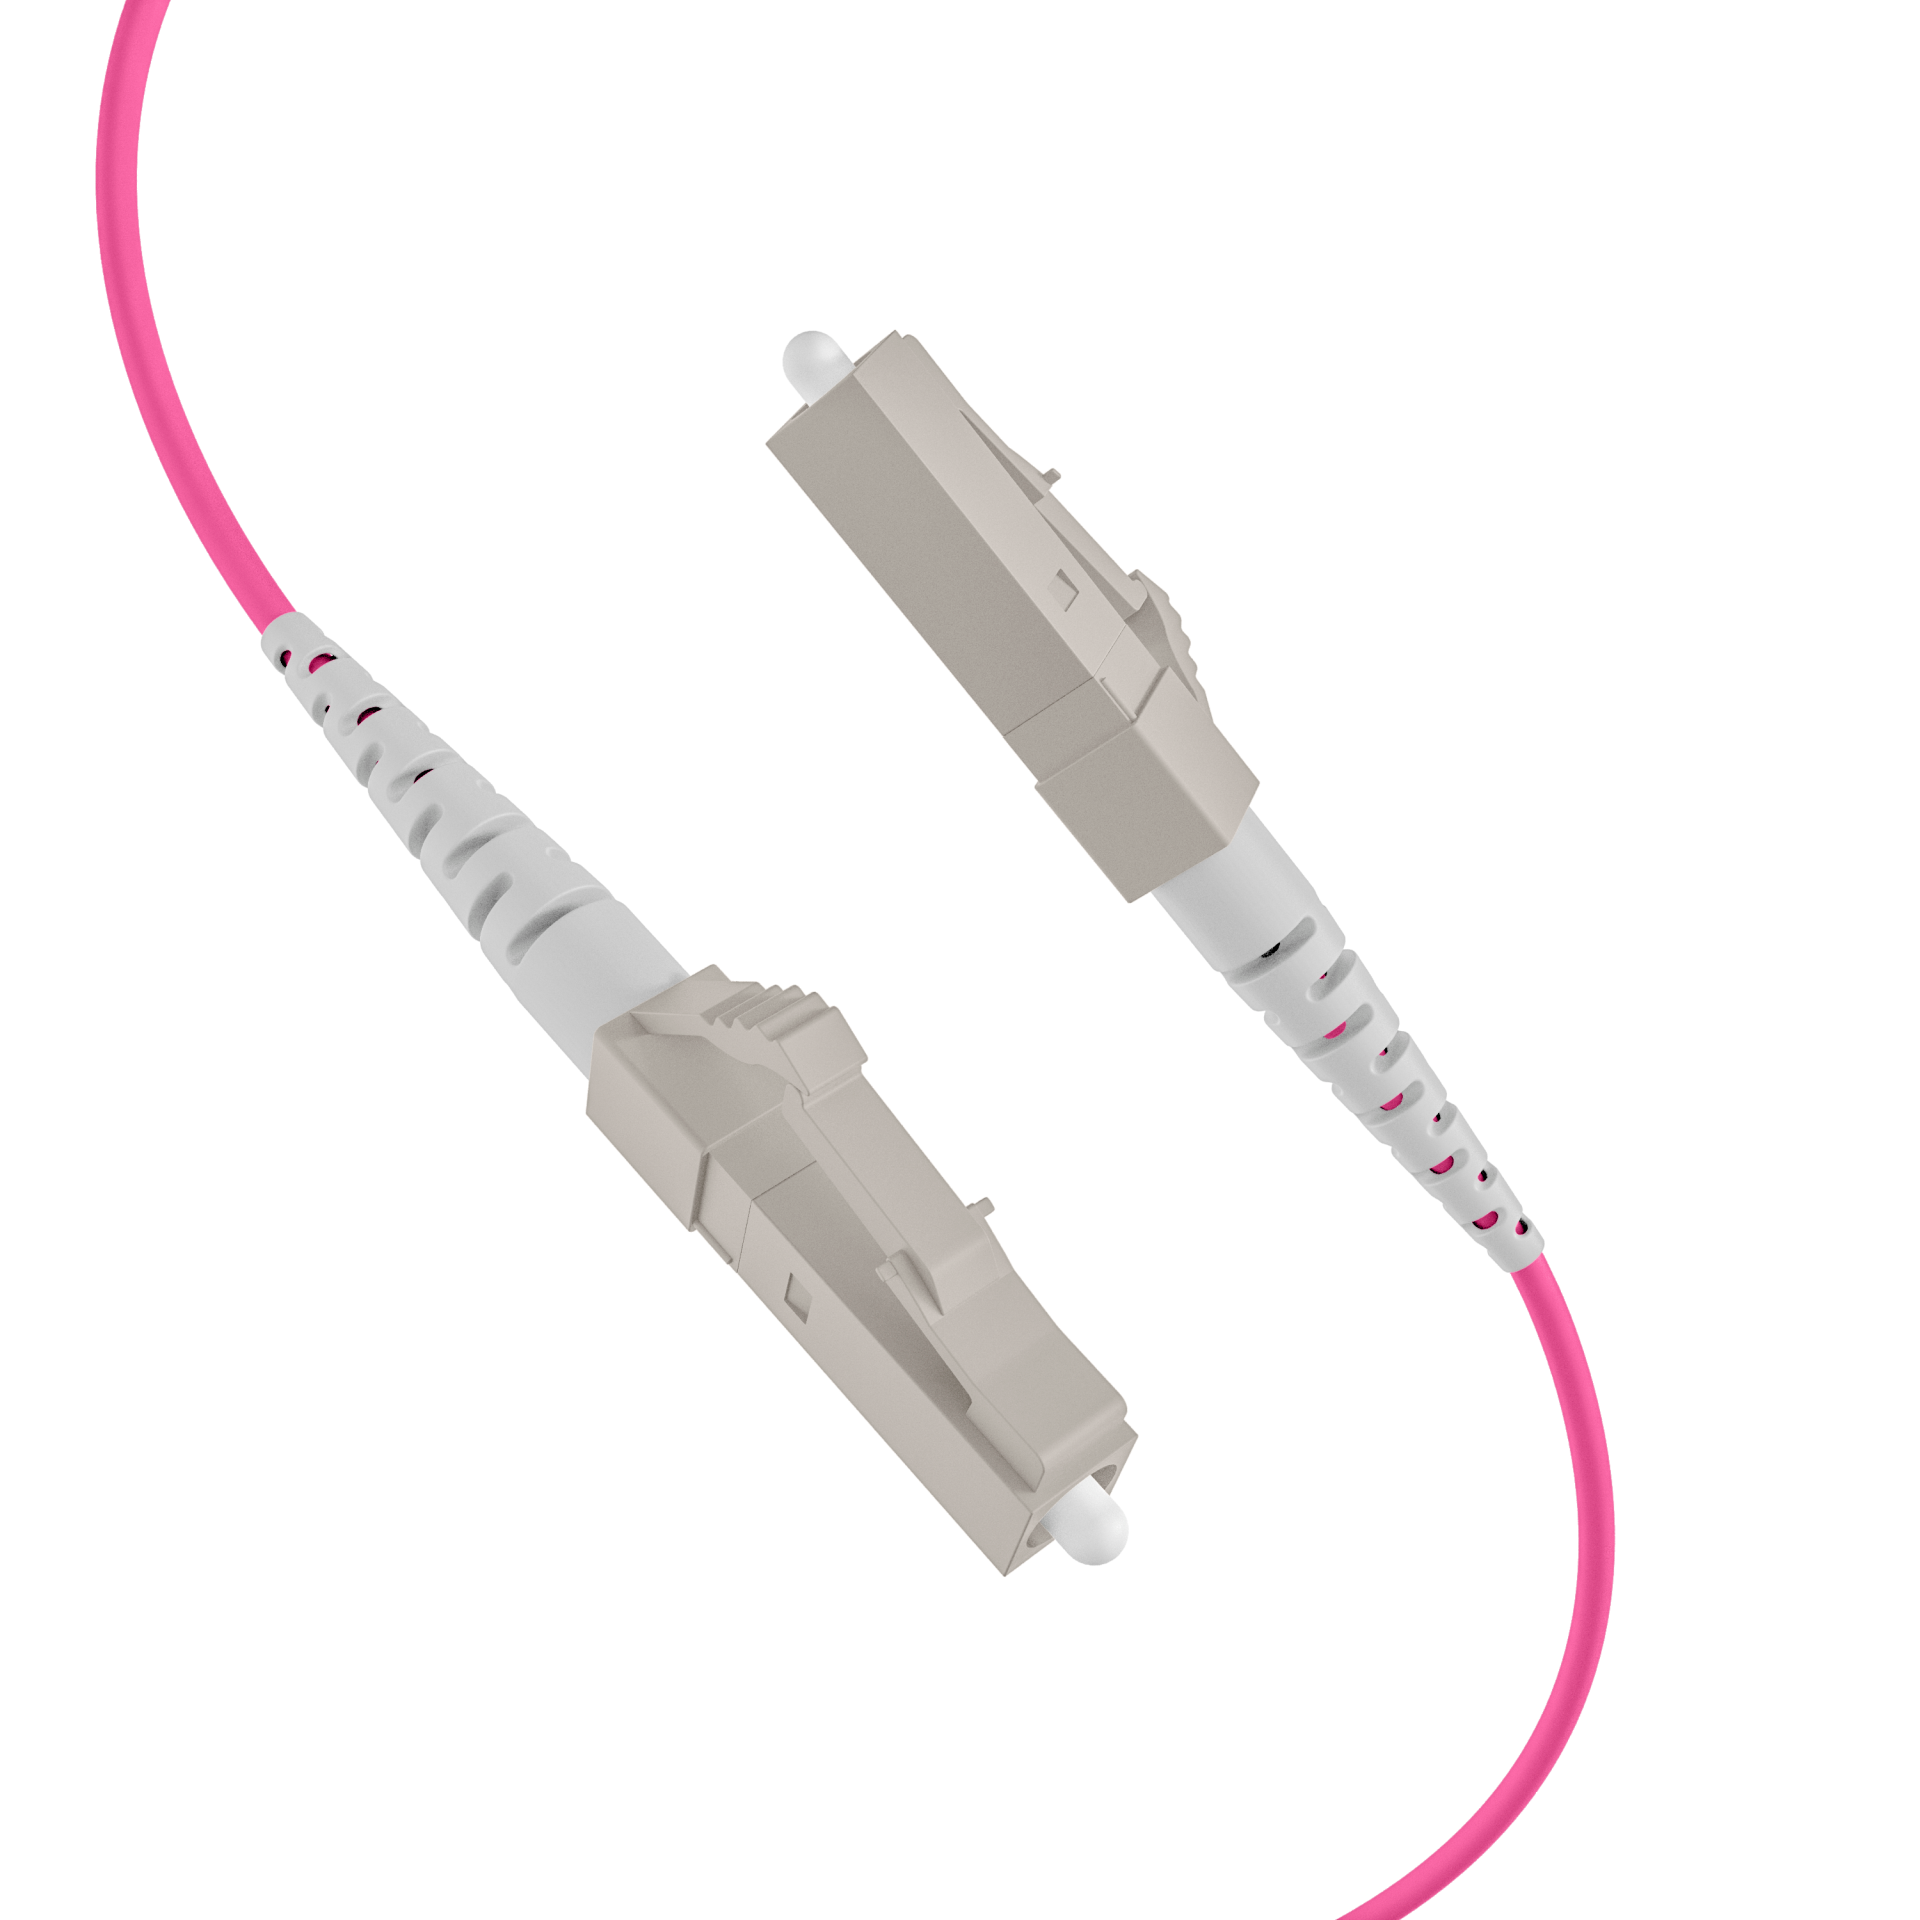 Trunkcable U-DQ(ZN)BH OM4 12G (1x12) LC-LC,160m Dca LSZH